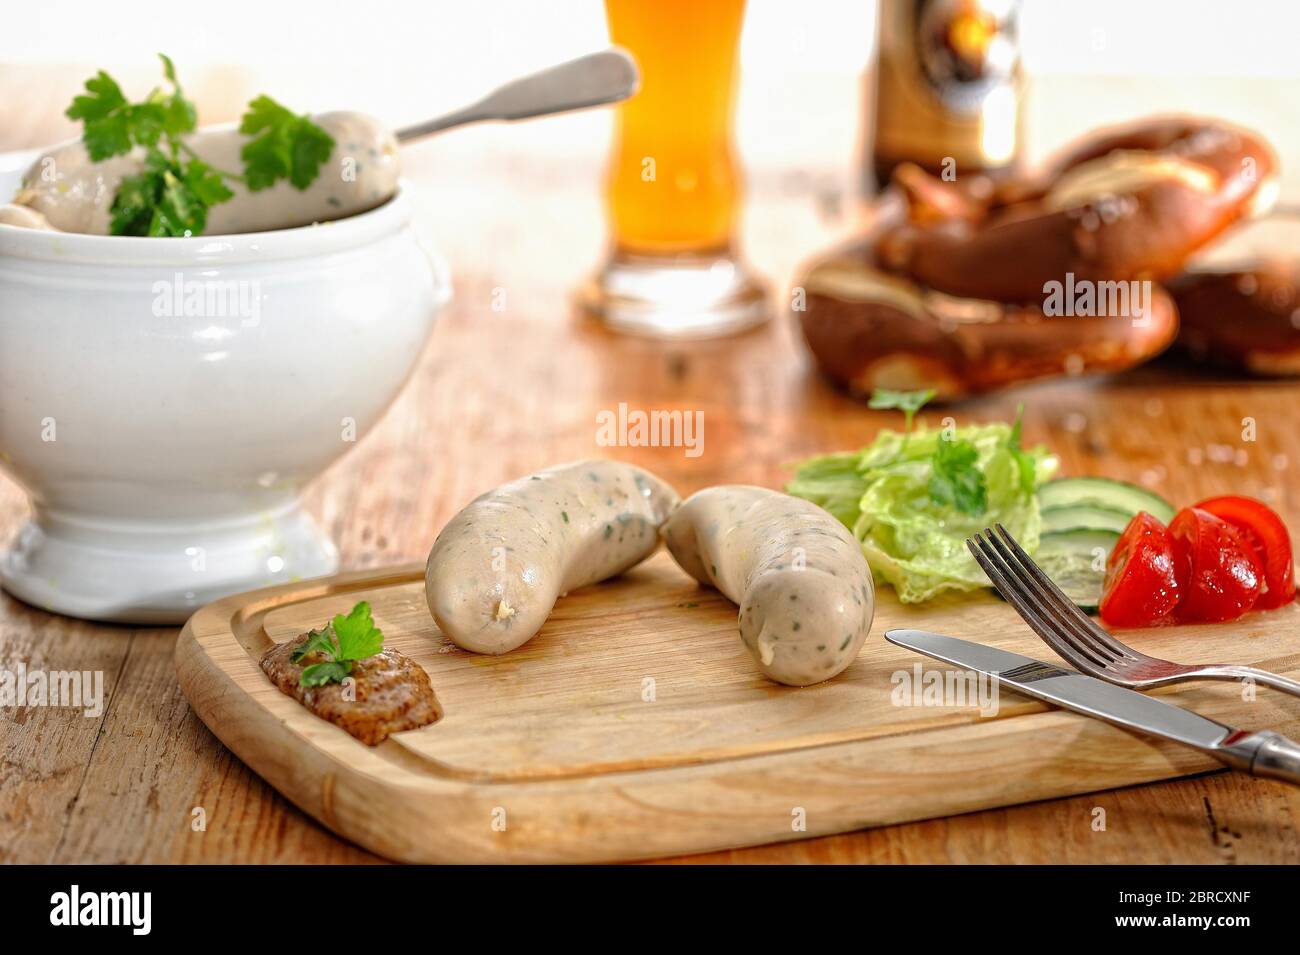 Munich Weisswurst breakfast with pretzels and wheat beer, Germany Stock Photo